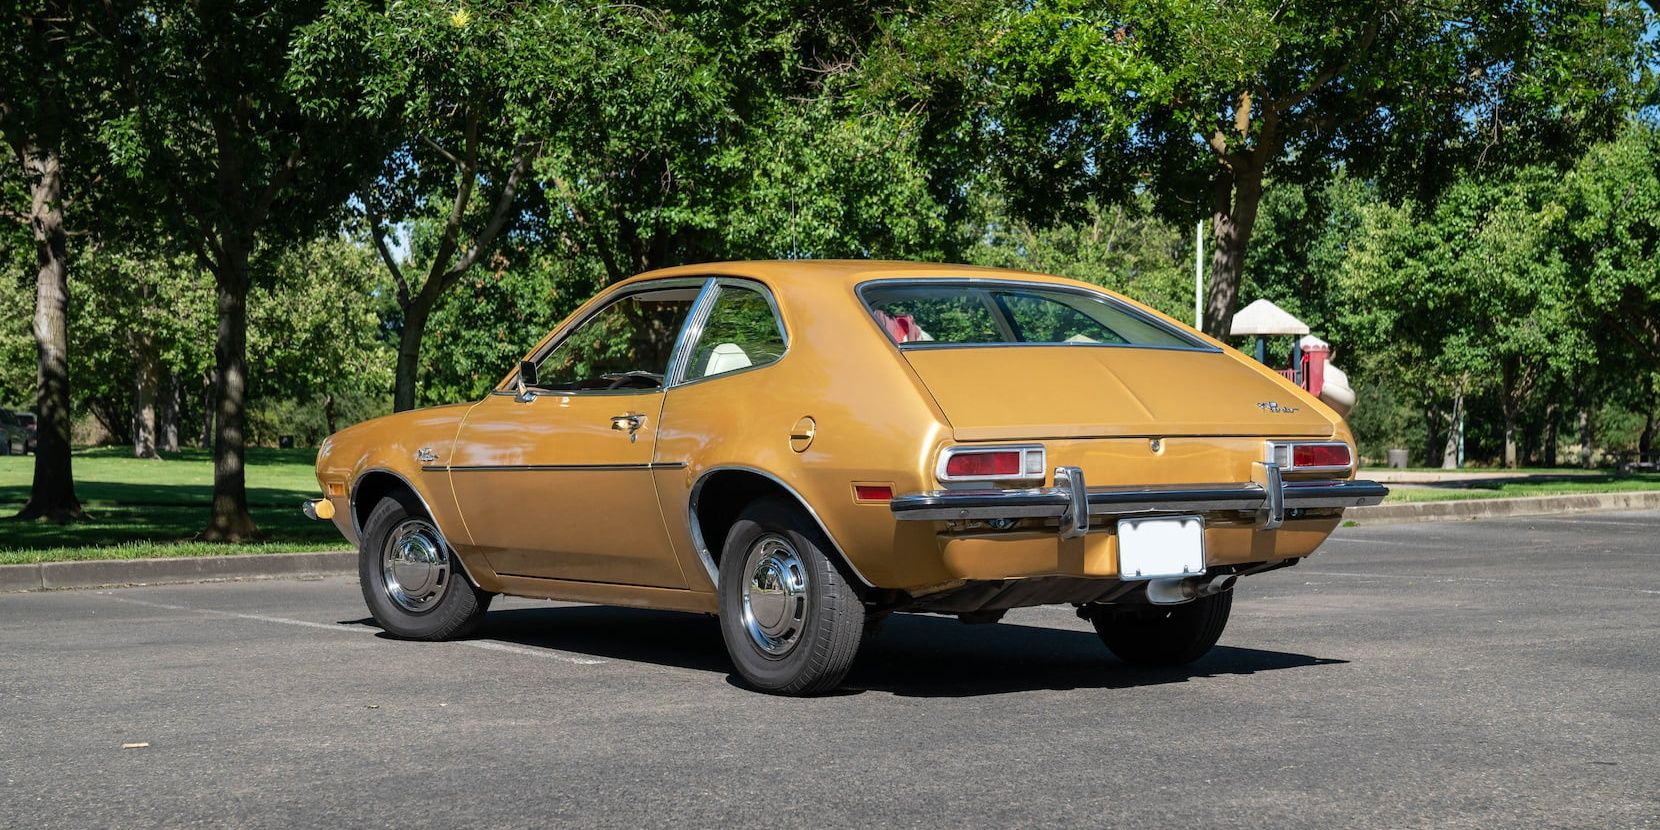 Brown 1973 Ford Pinto Parked Outside